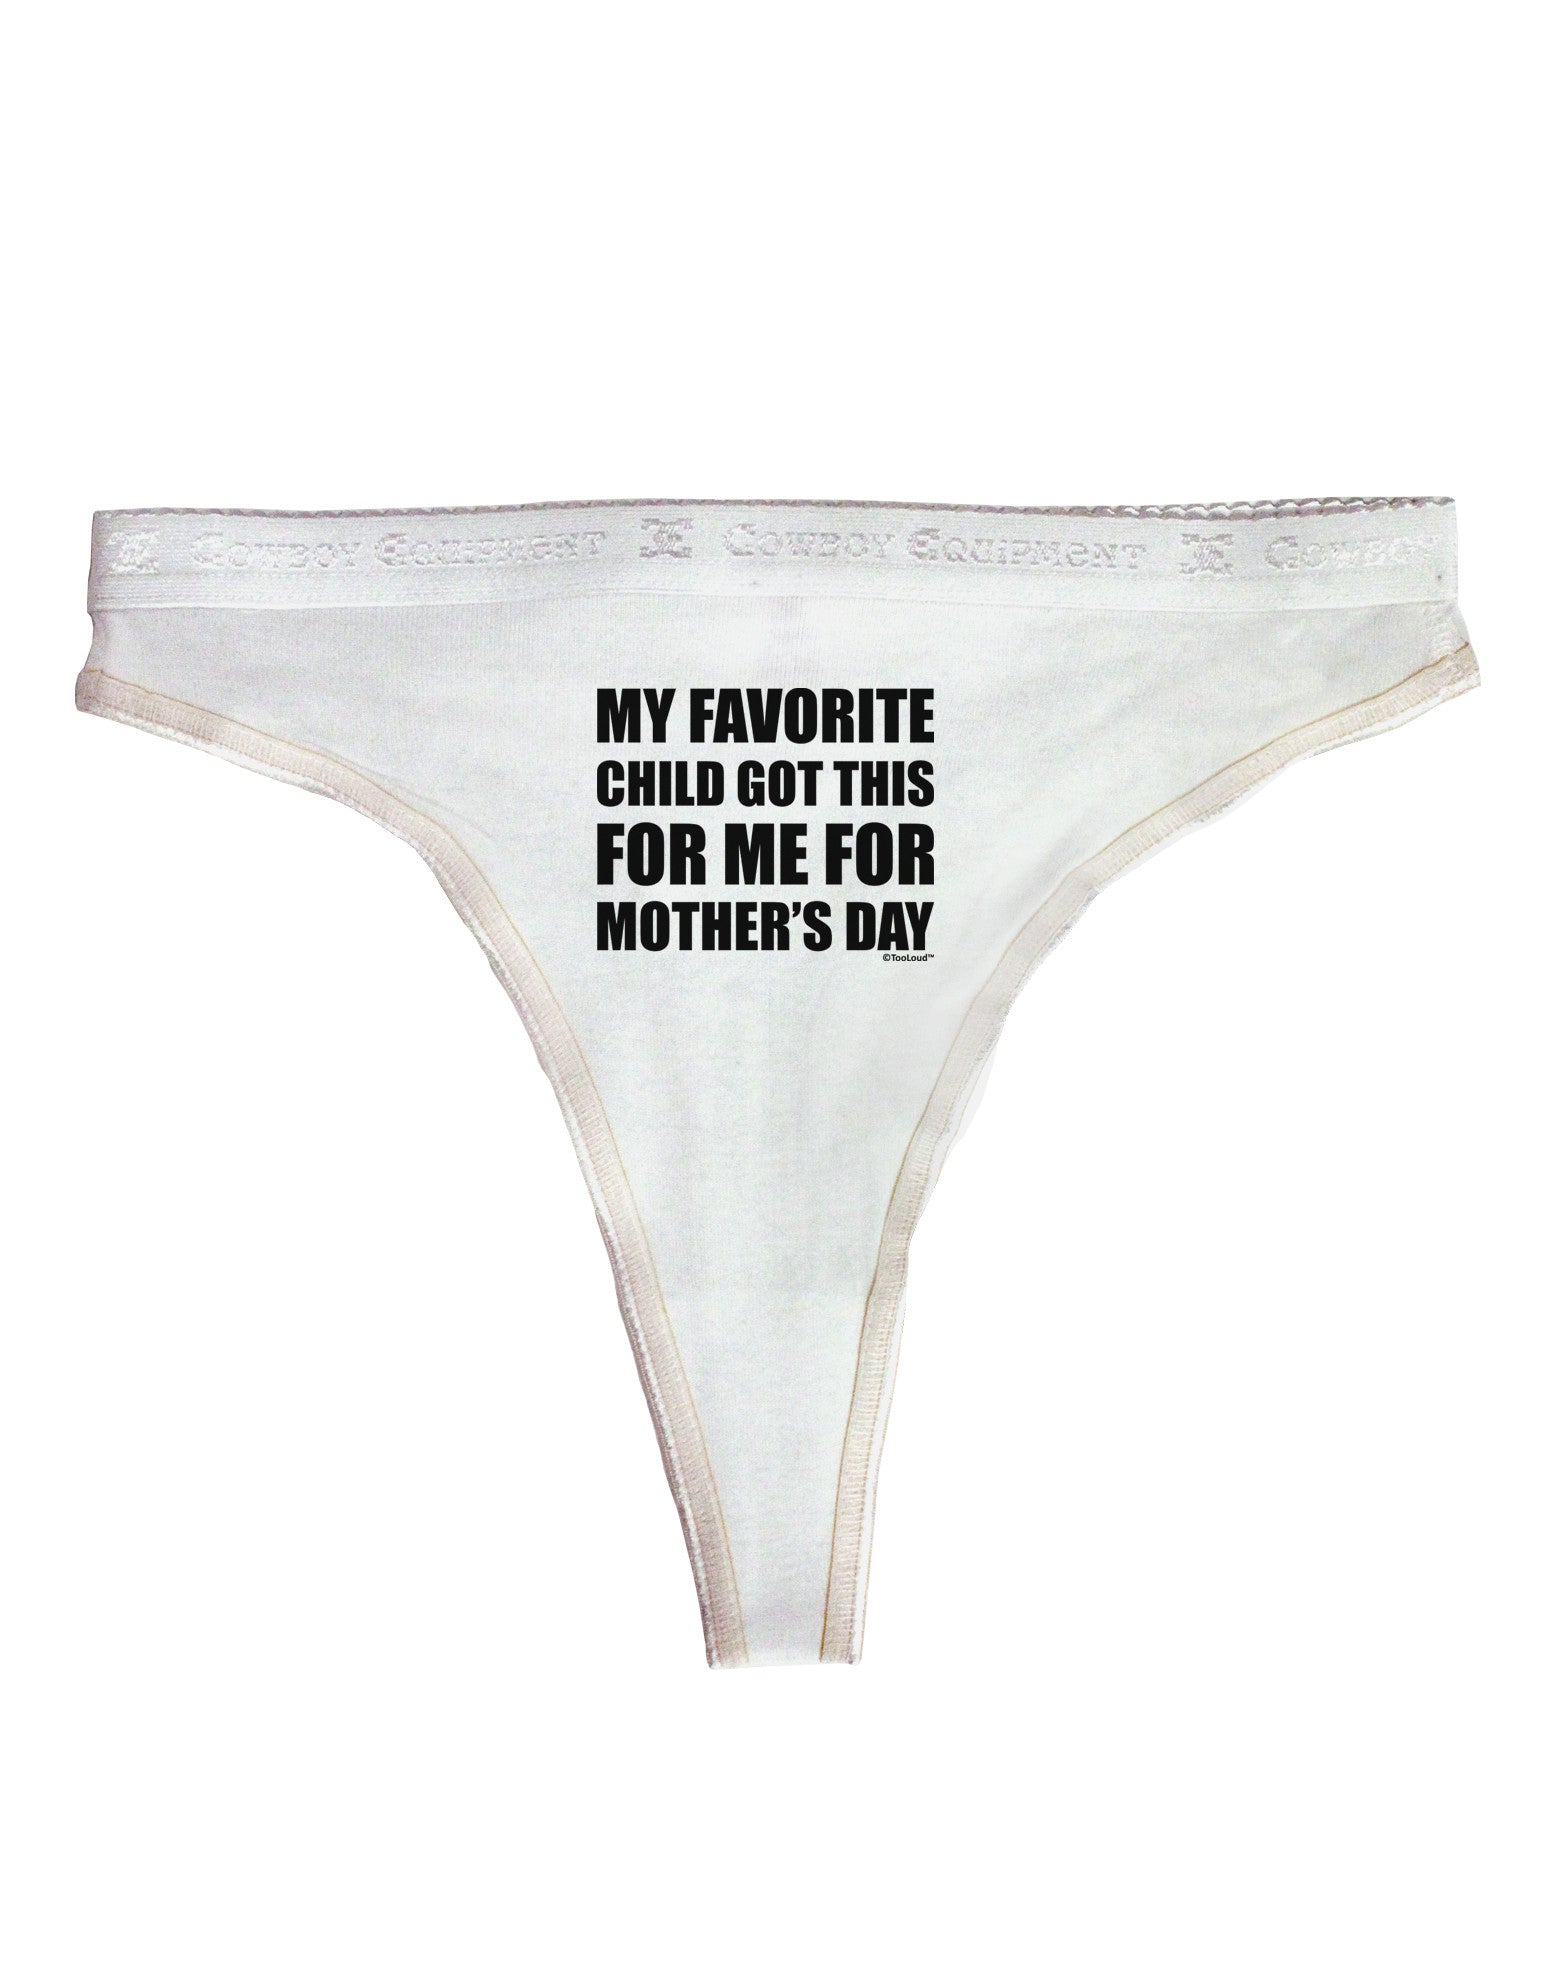 My First Mother's Day - Baby Feet - Pink Womens Thong Underwear by Too -  Davson Sales